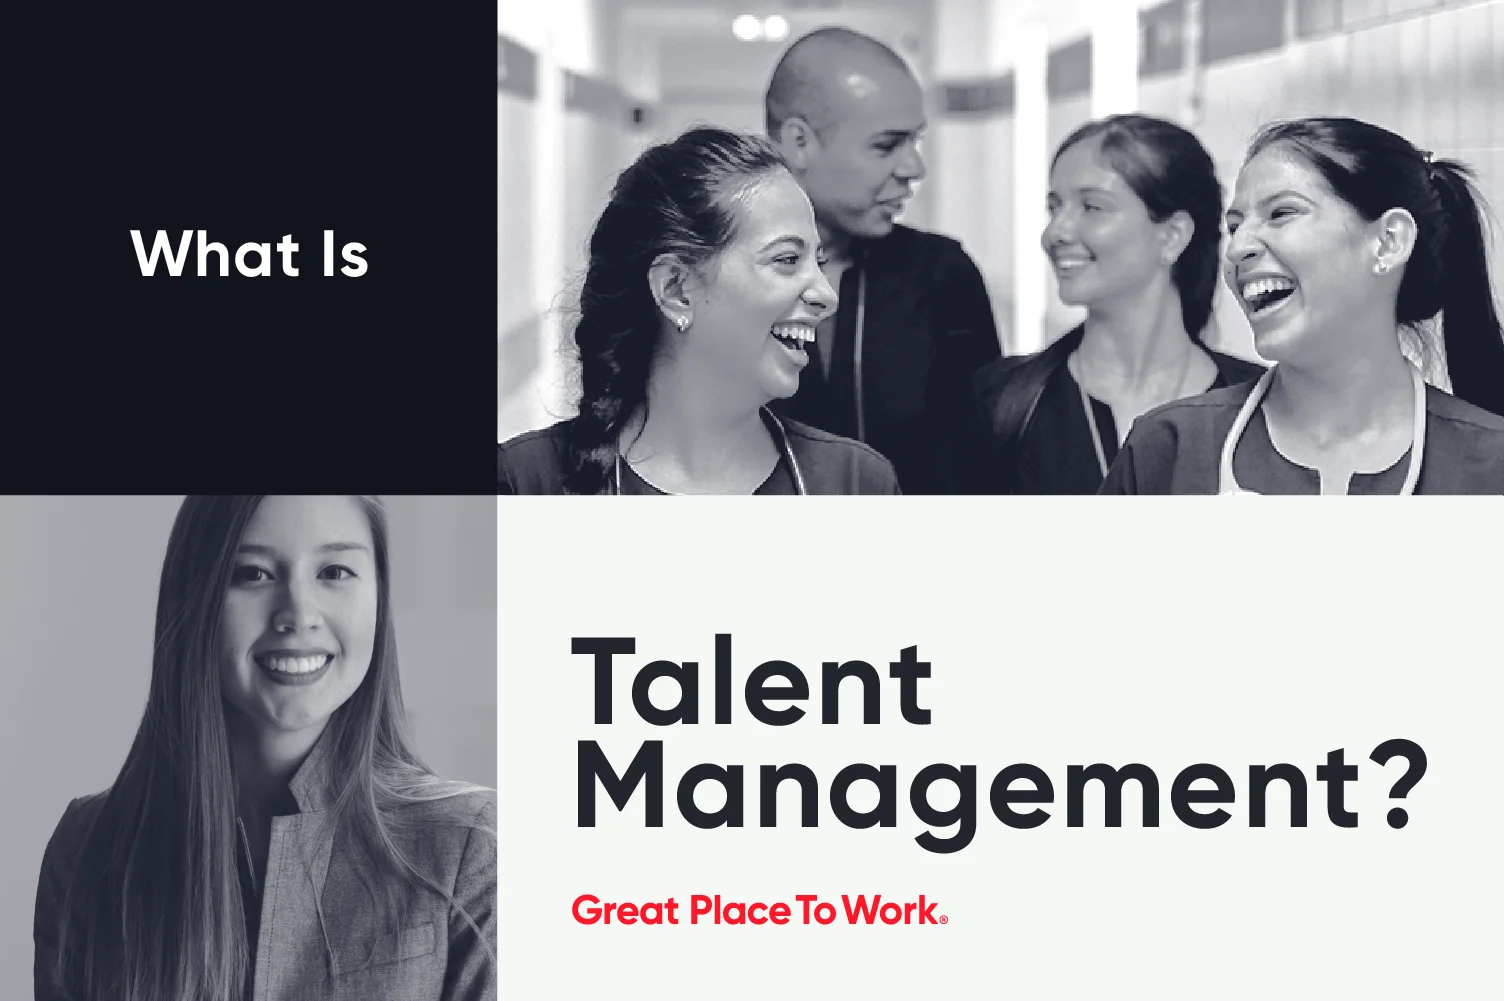  What Is Talent Management? Definition, Strategy, Processes and Models 